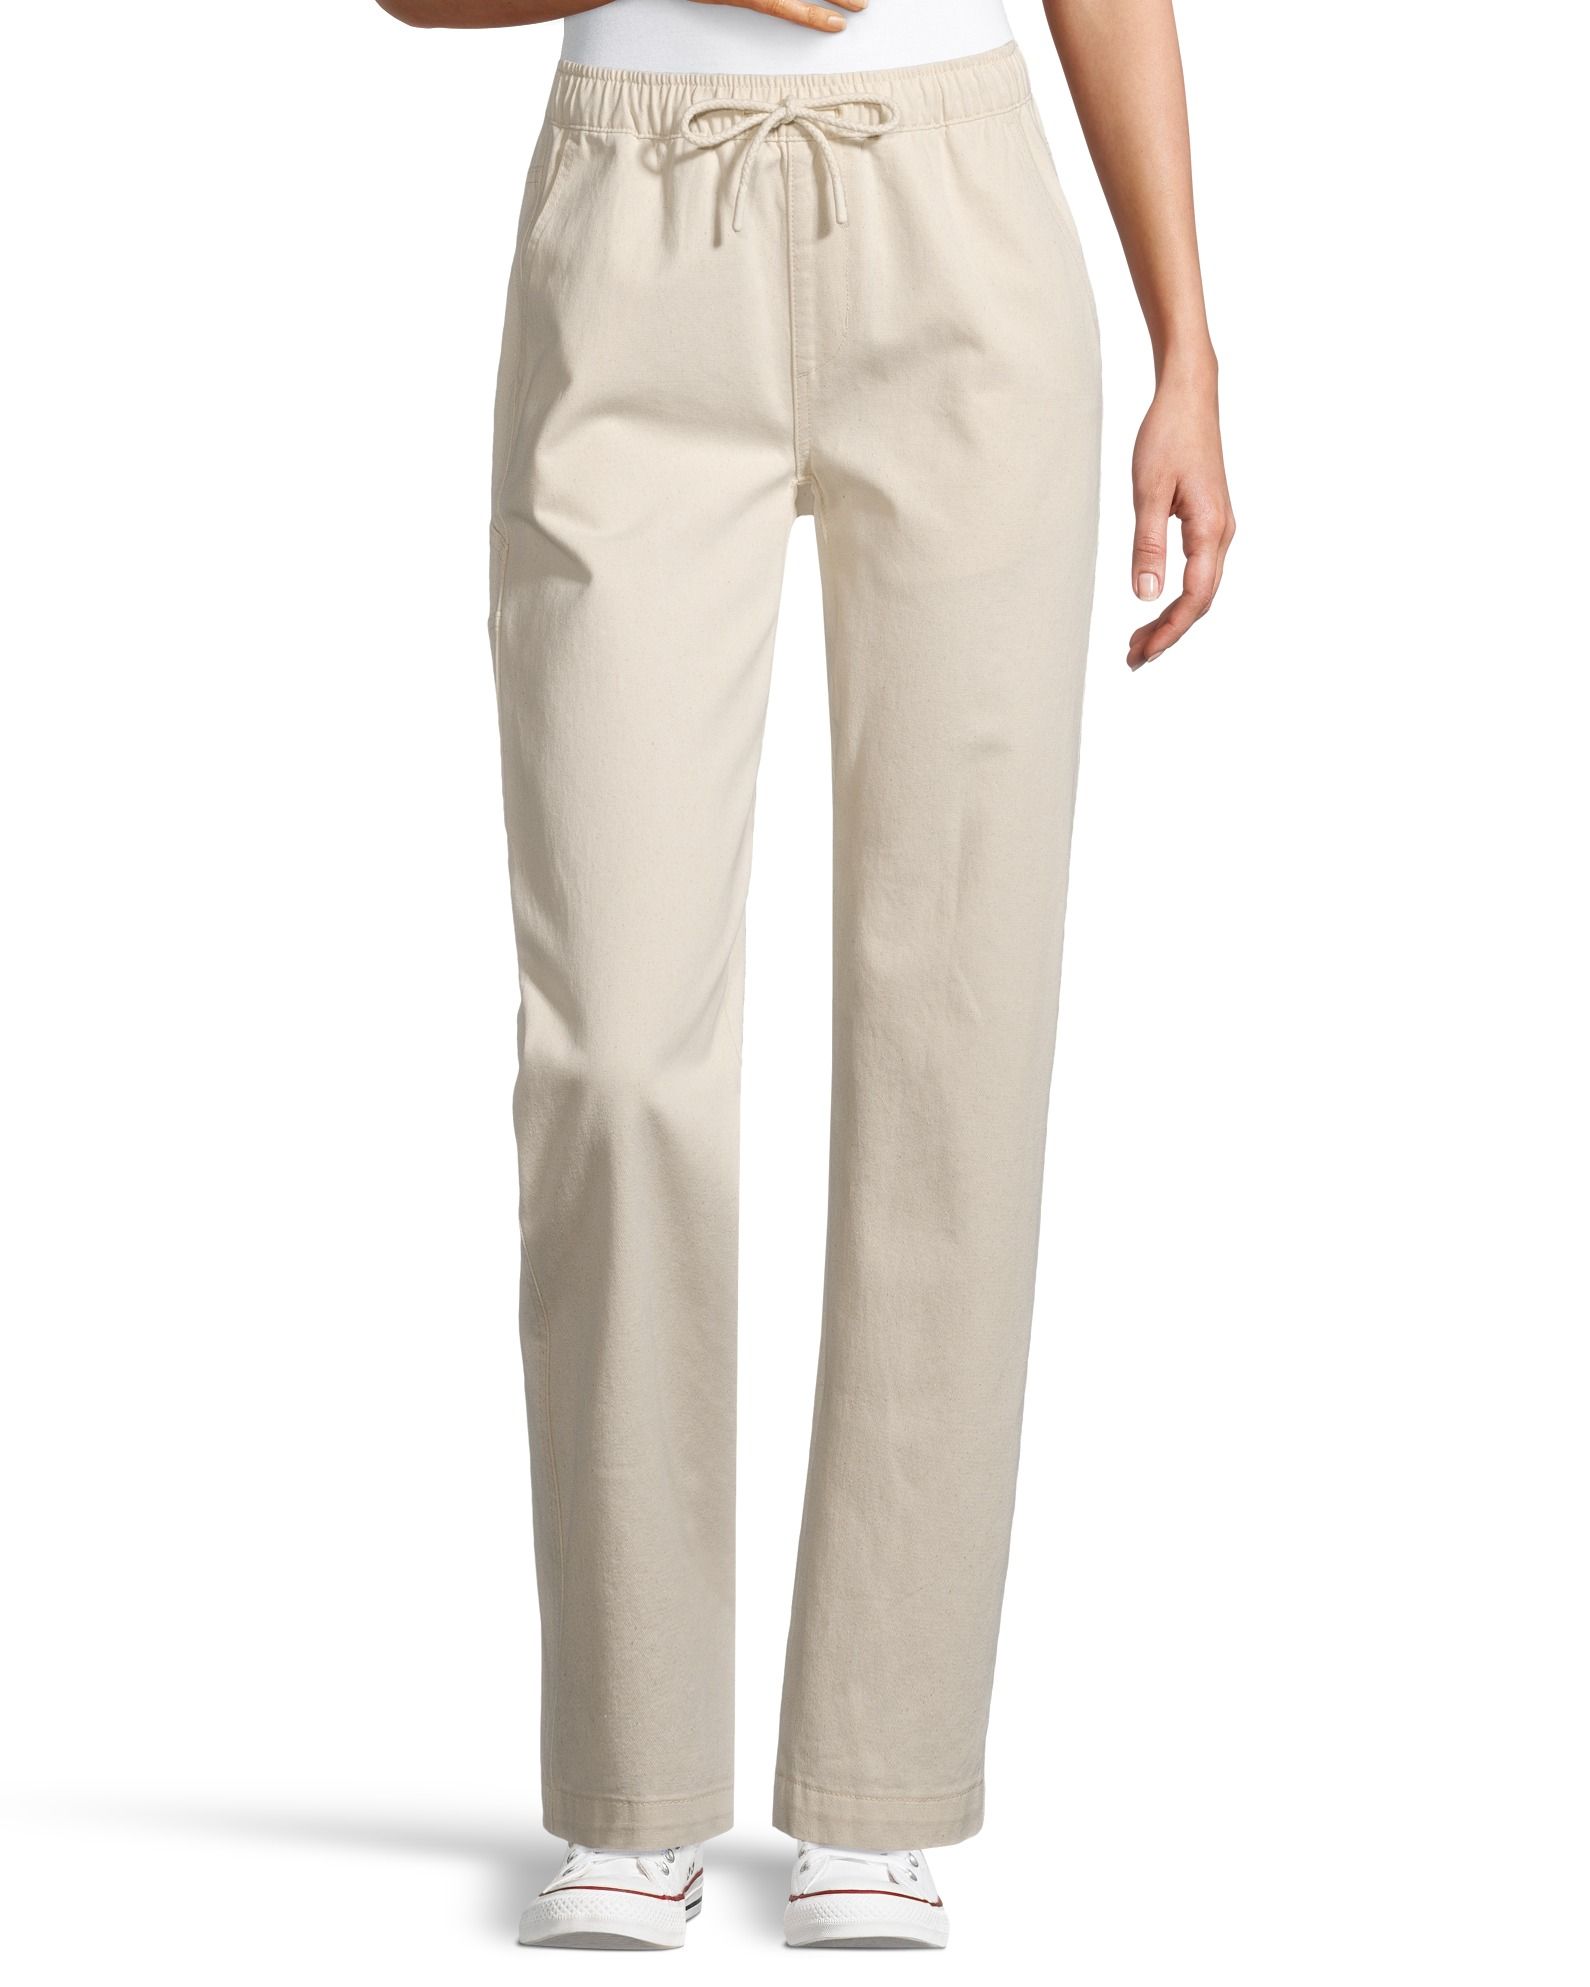 FarWest Women's Pull On Utility Pants | Marks